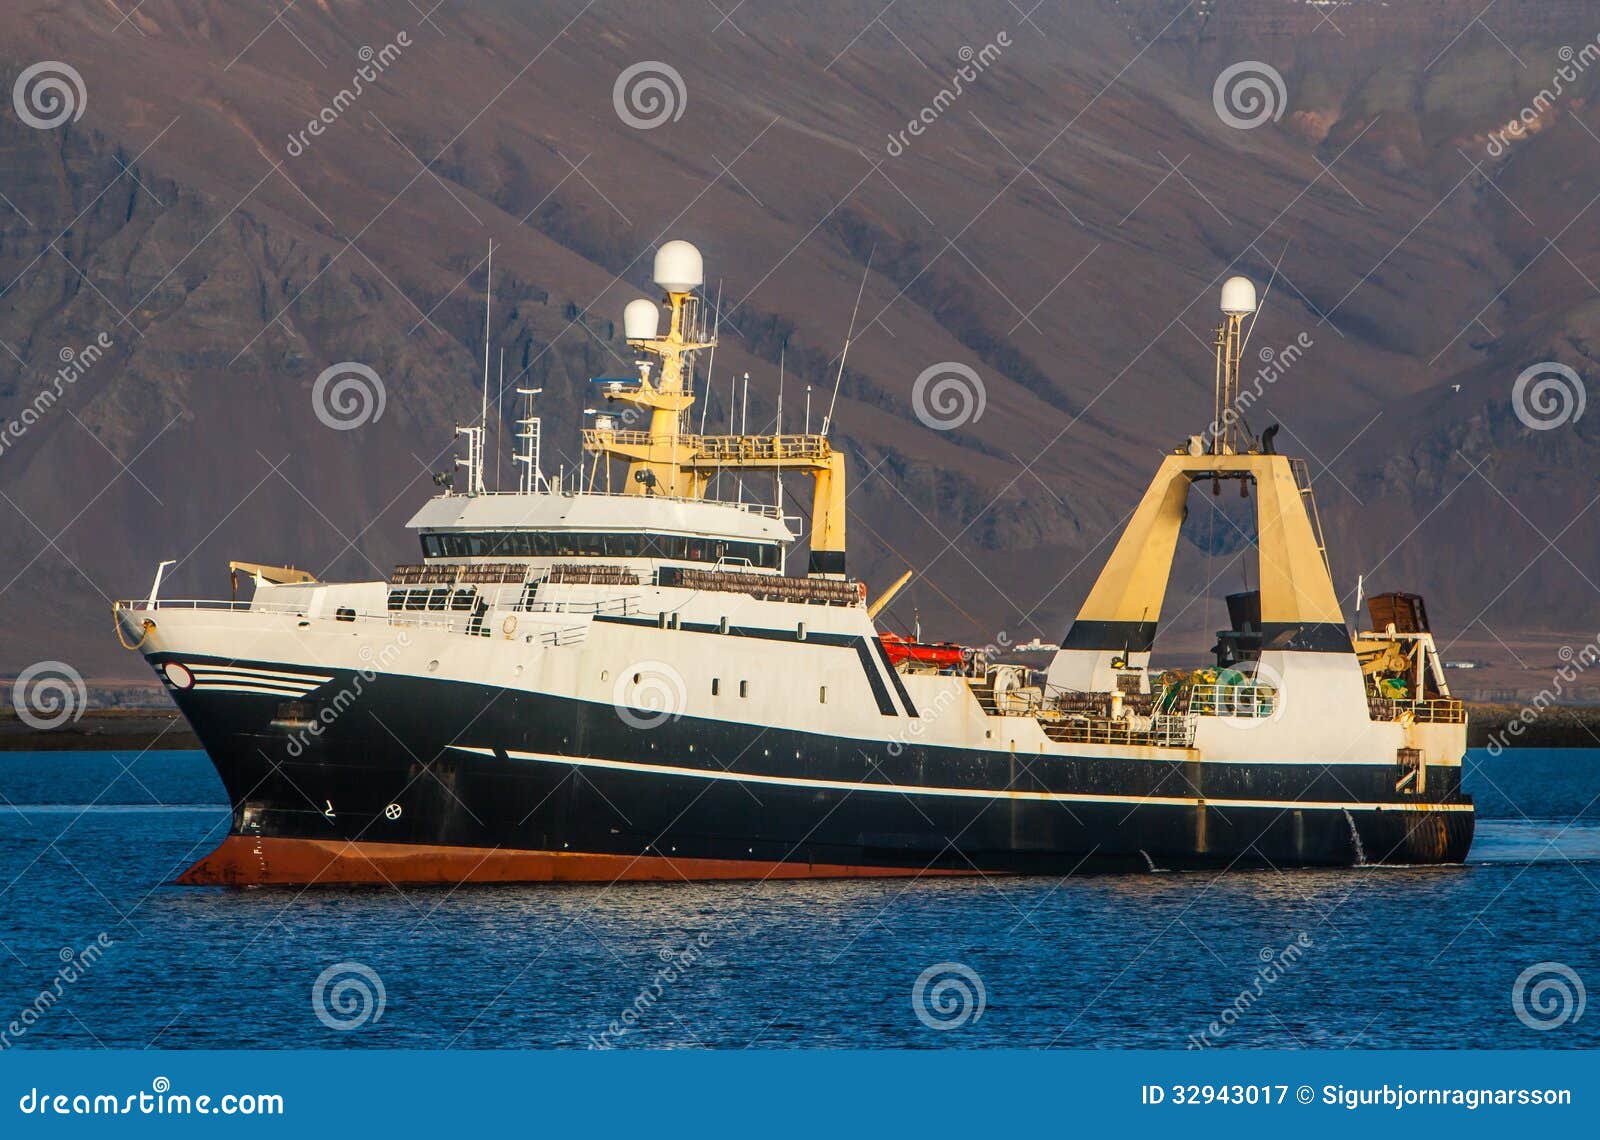  commercial fishing factory stern trawler from the Faroe Islands